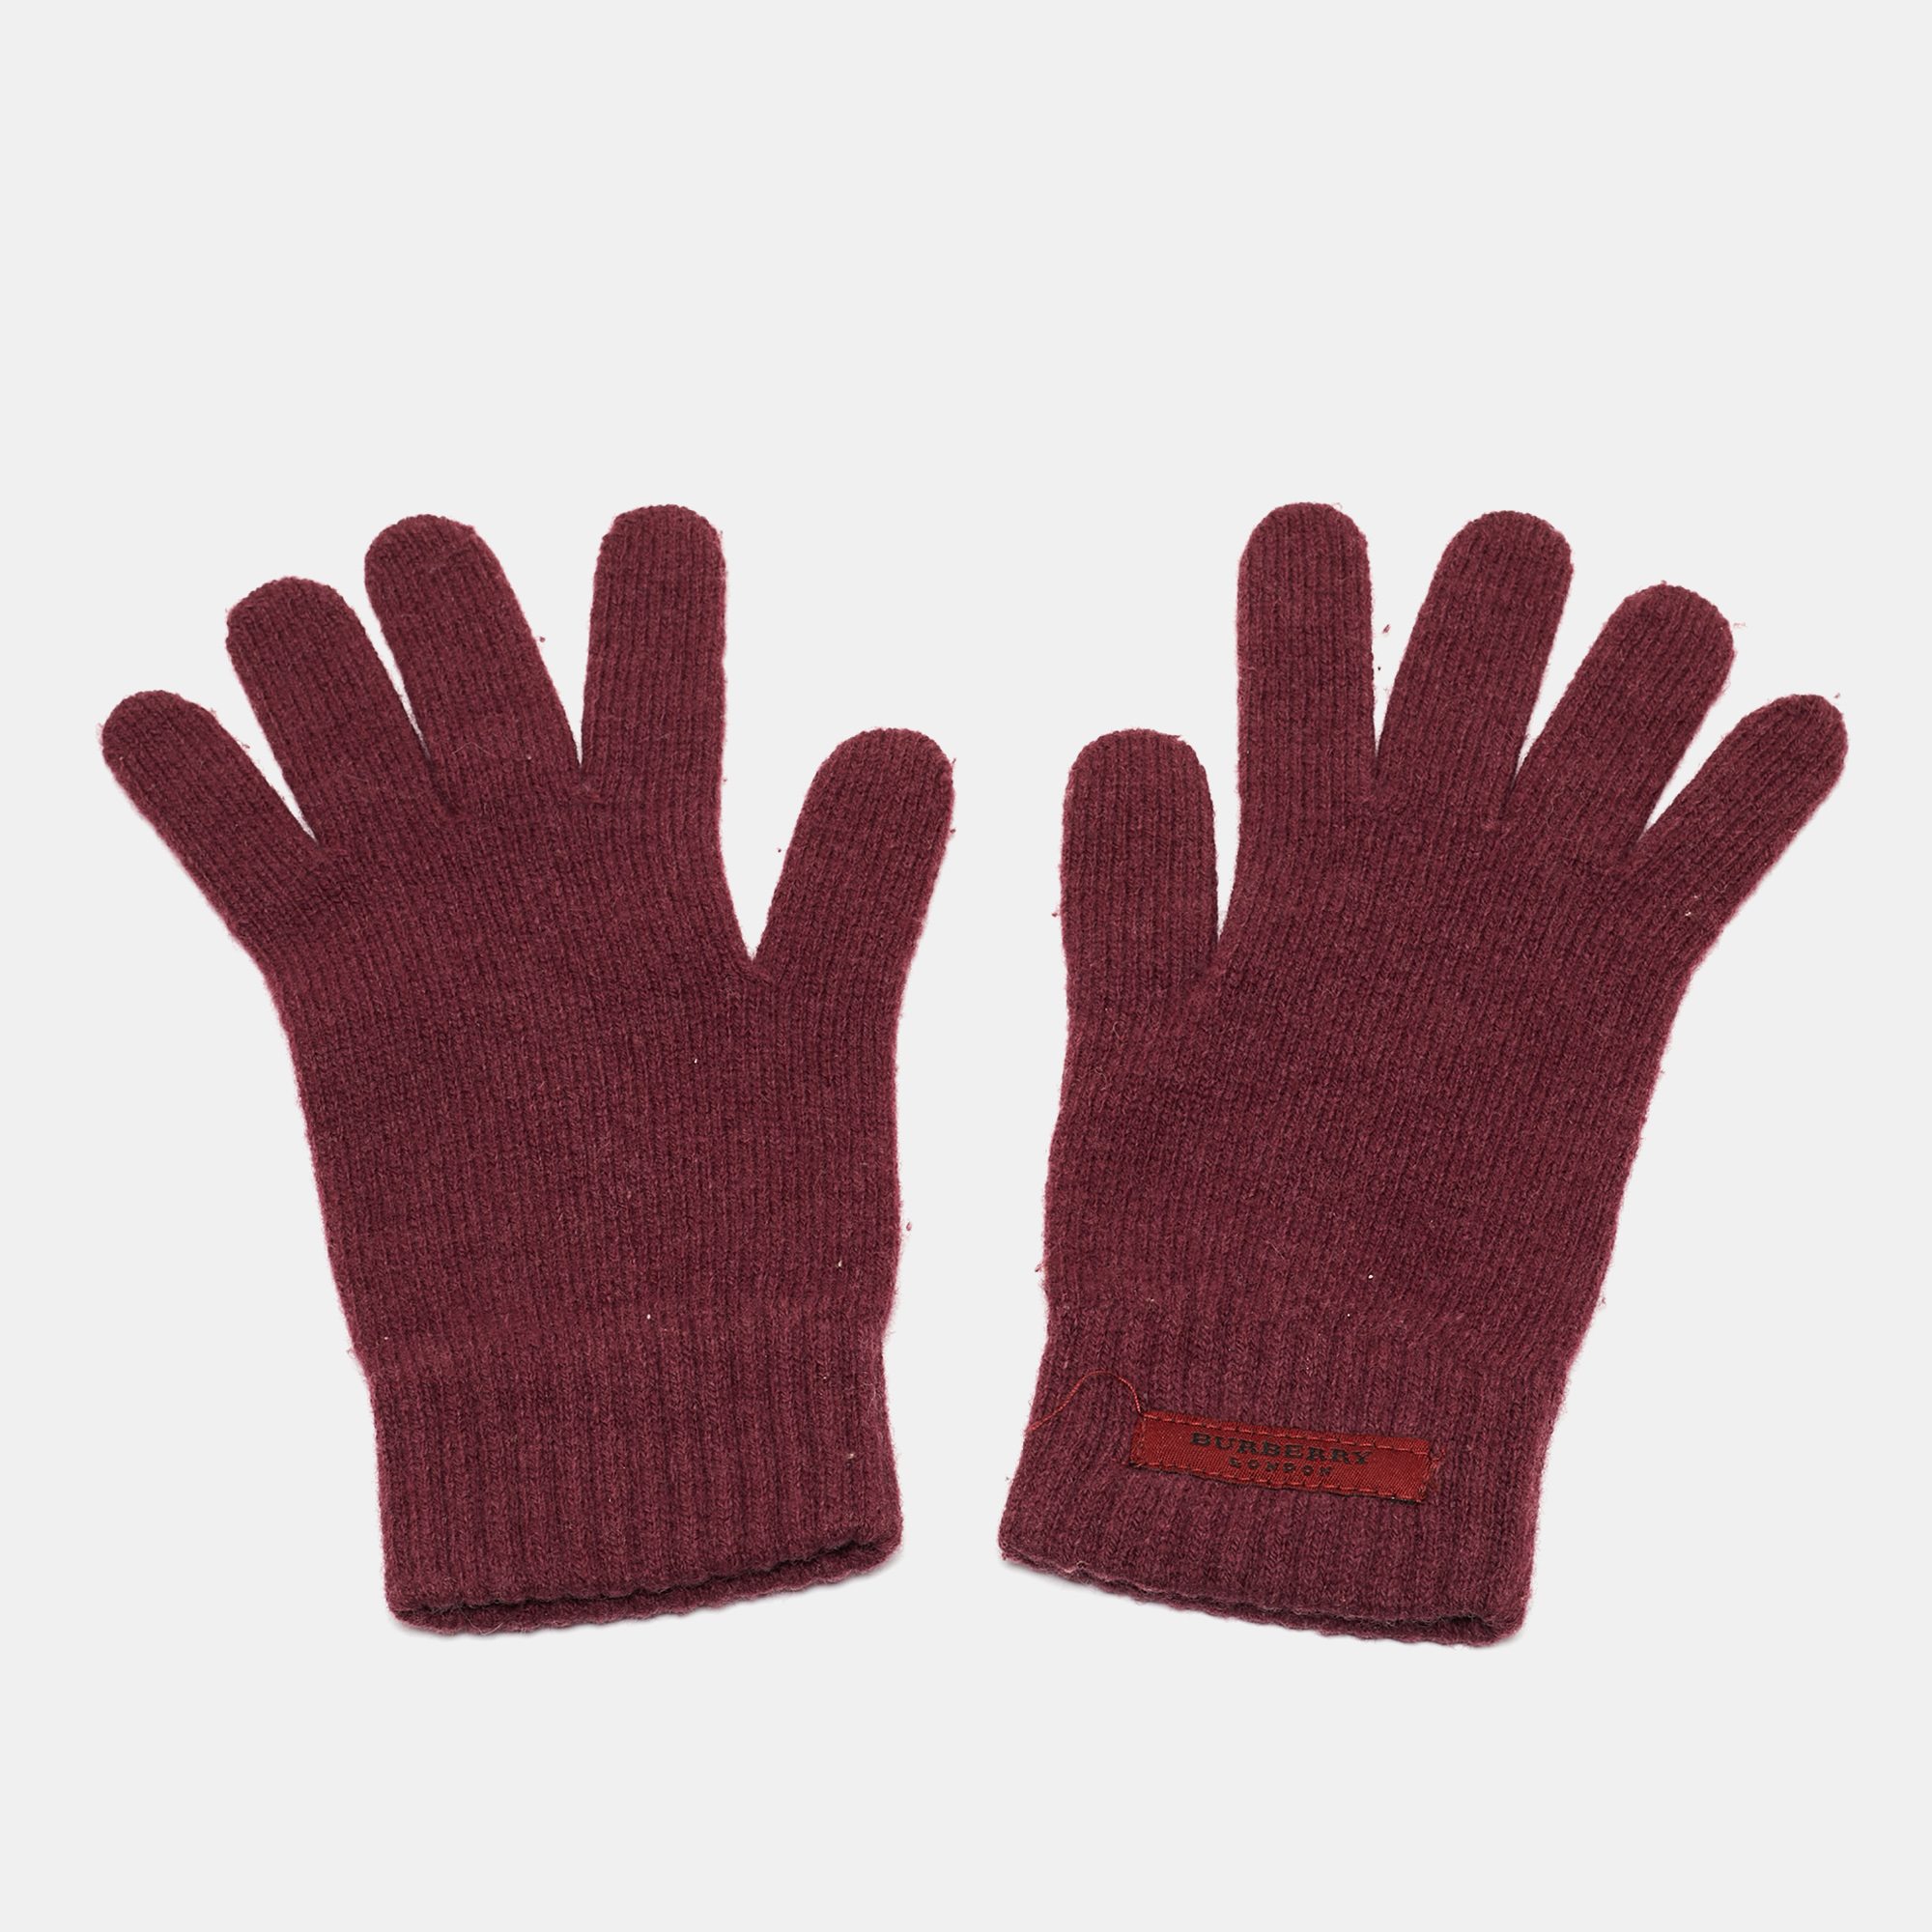 Add to your winter style with these wool gloves for women from Burberry. The pair brings a comfortable wearing experience and a durable quality.